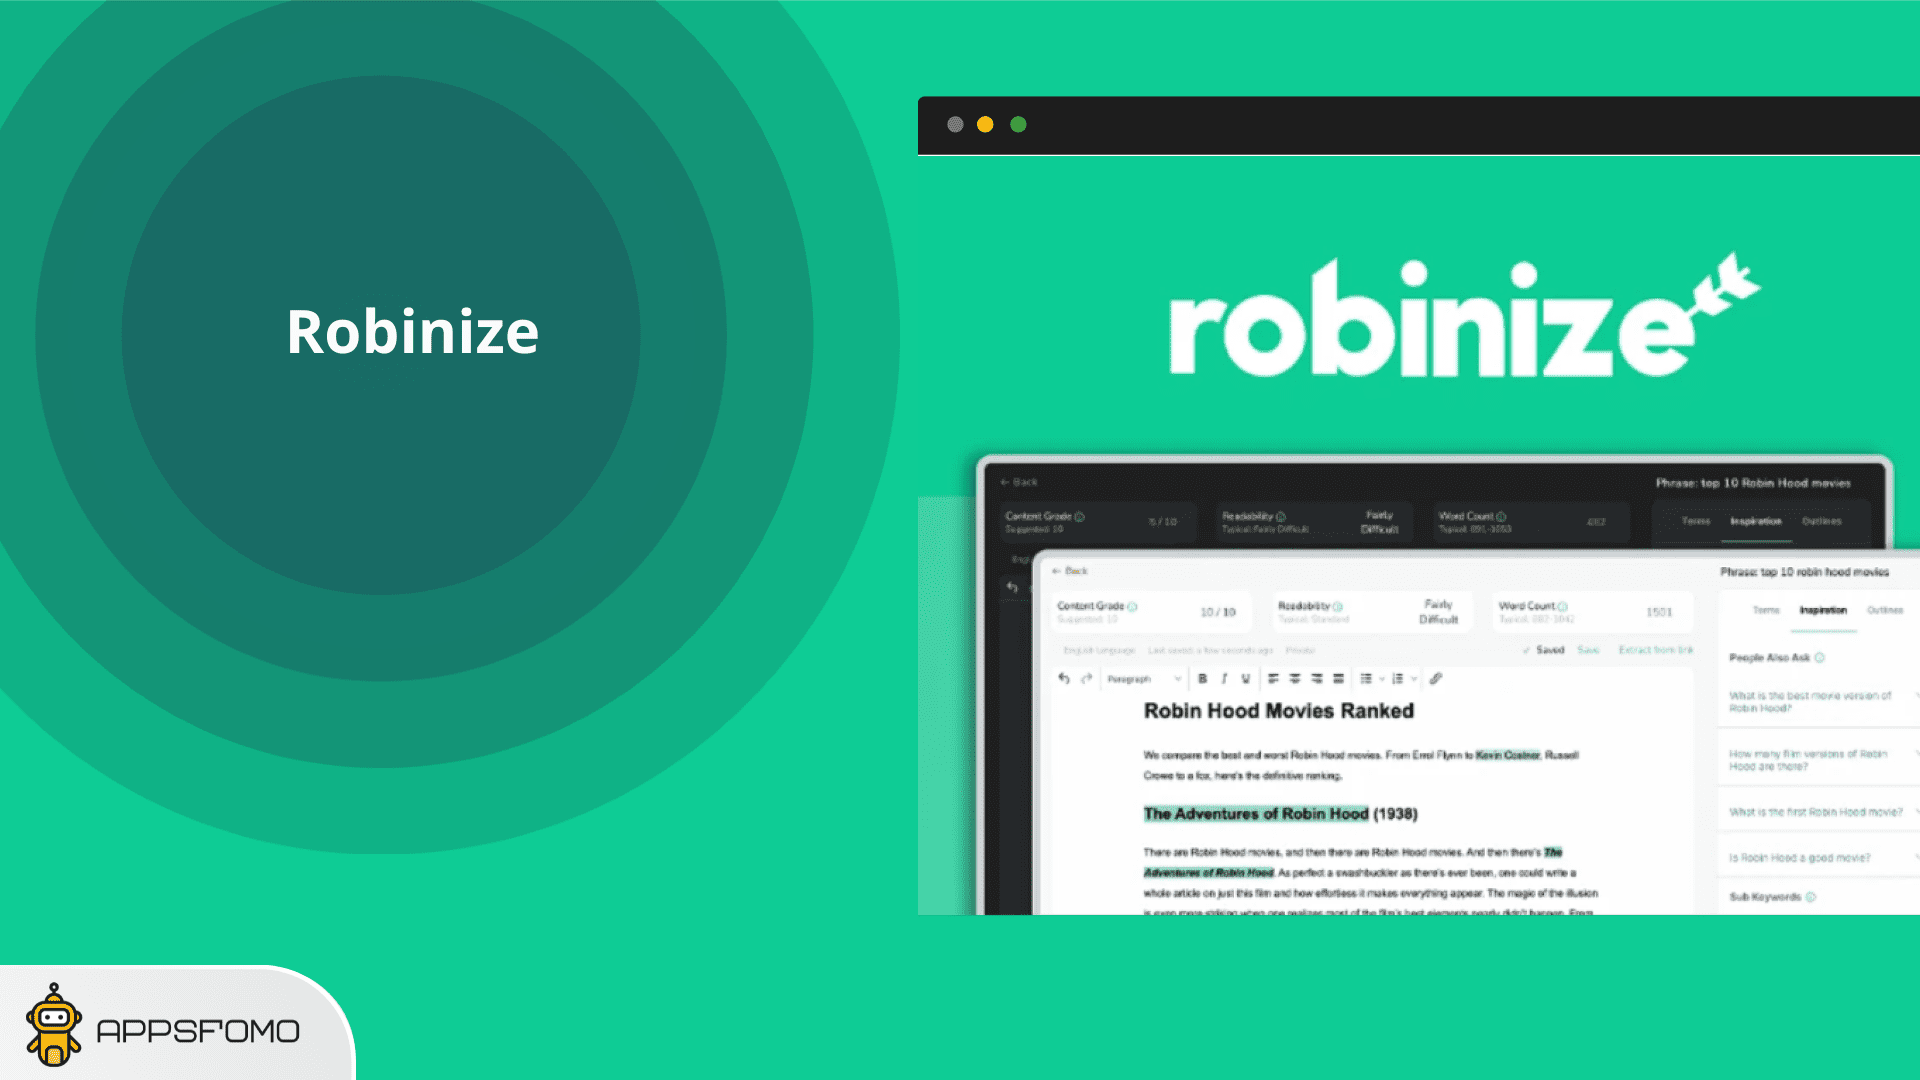 robinize featured image